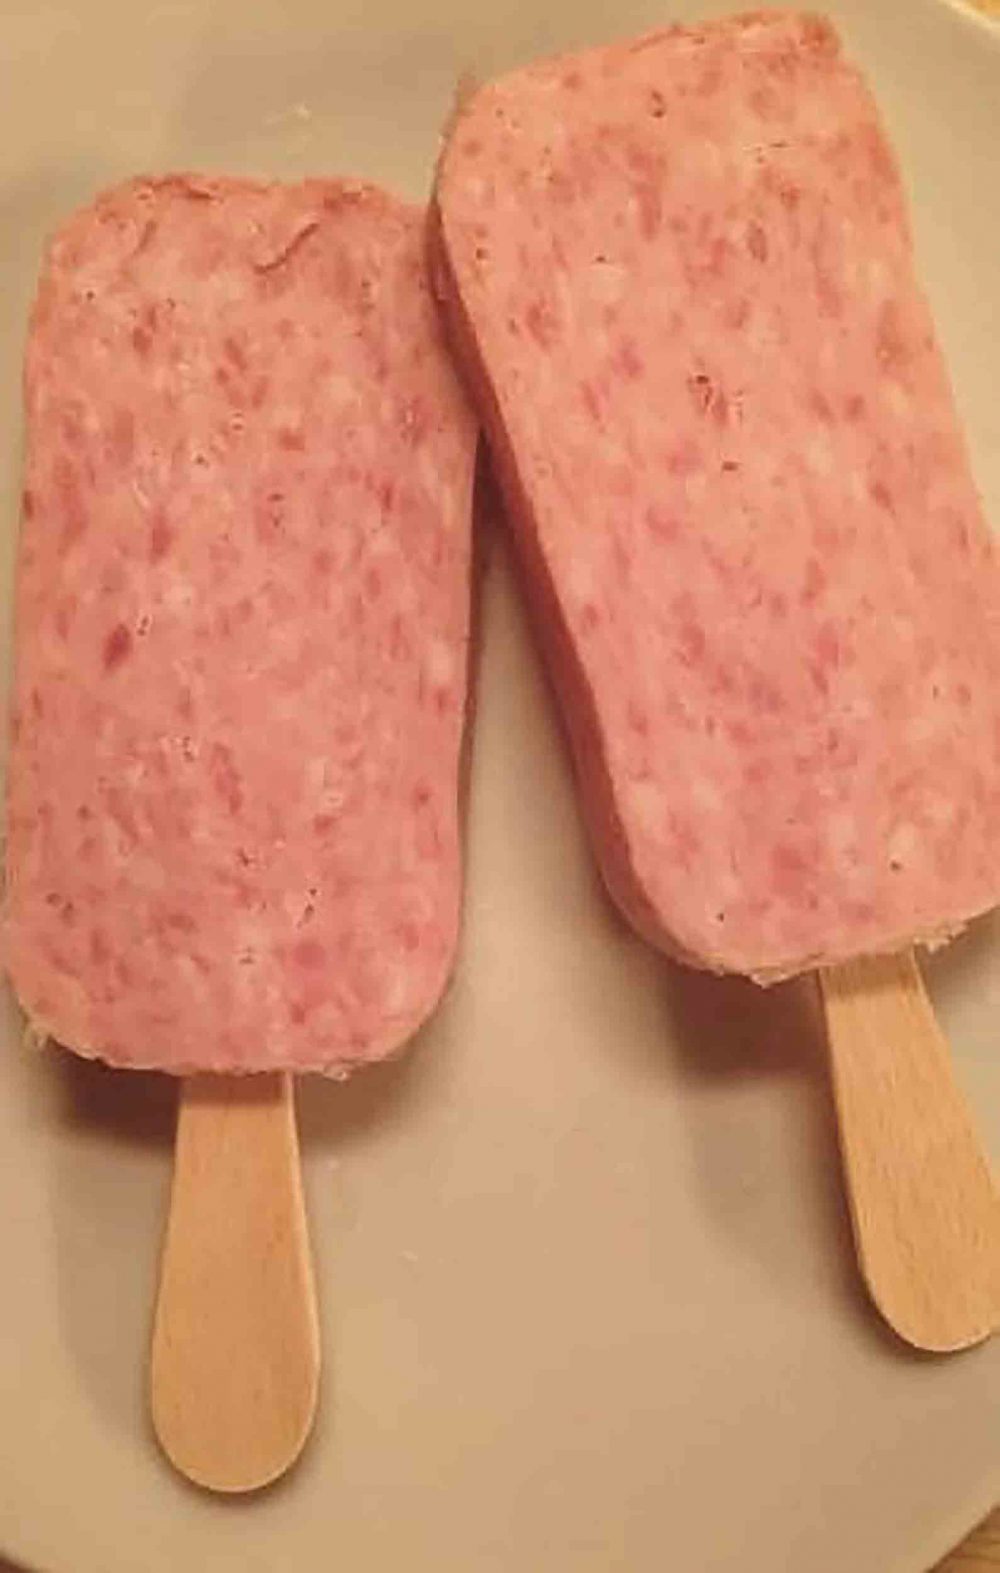 Harry Lawrence's meatsicle | Food and Drink News